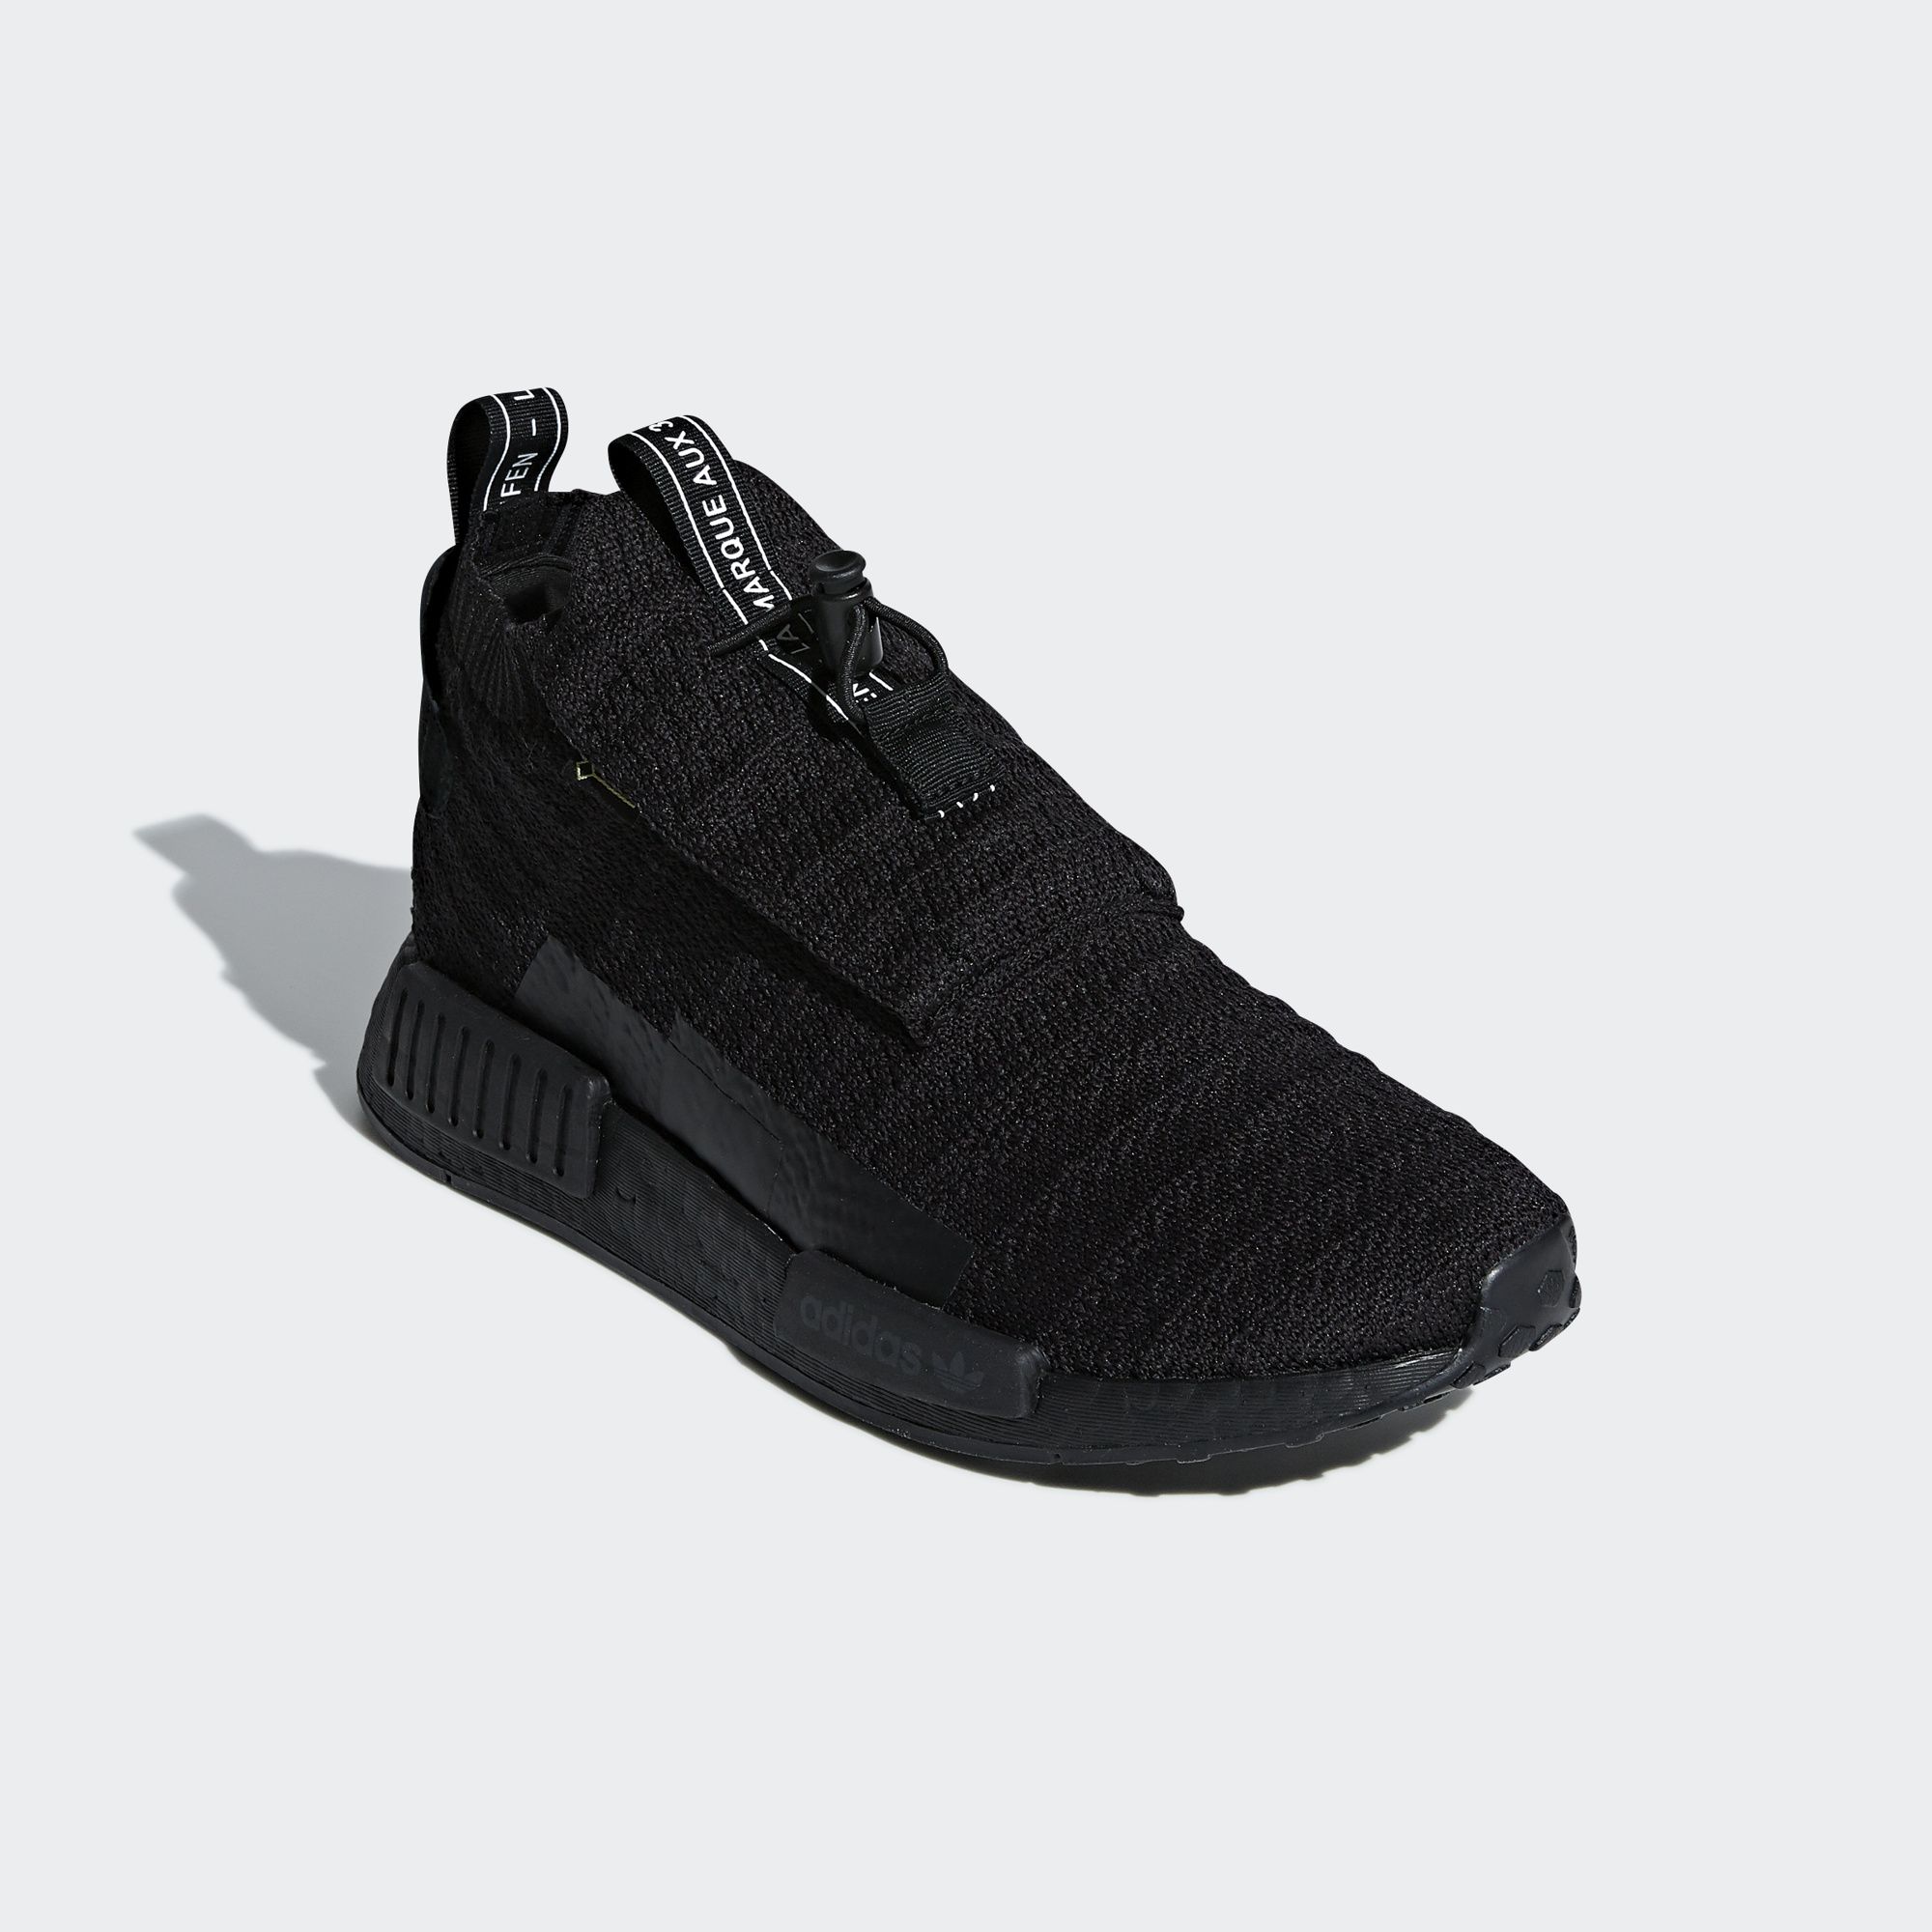 The adidas NMD TS1 'GORE-TEX' Has a 